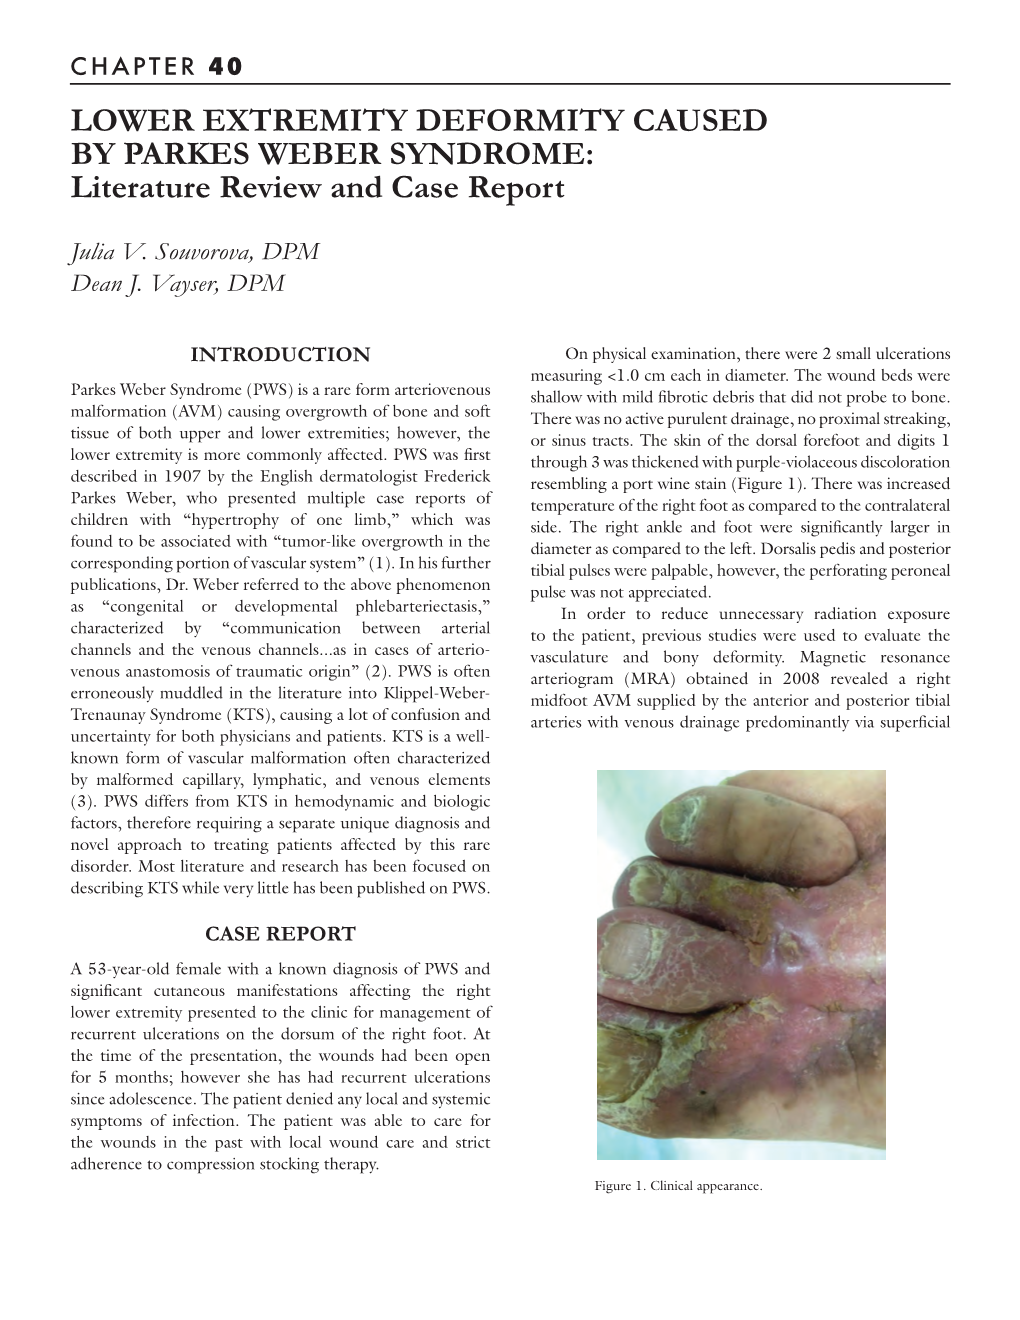 LOWER EXTREMITY DEFORMITY CAUSED by PARKES WEBER SYNDROME: Literature Review and Case Report